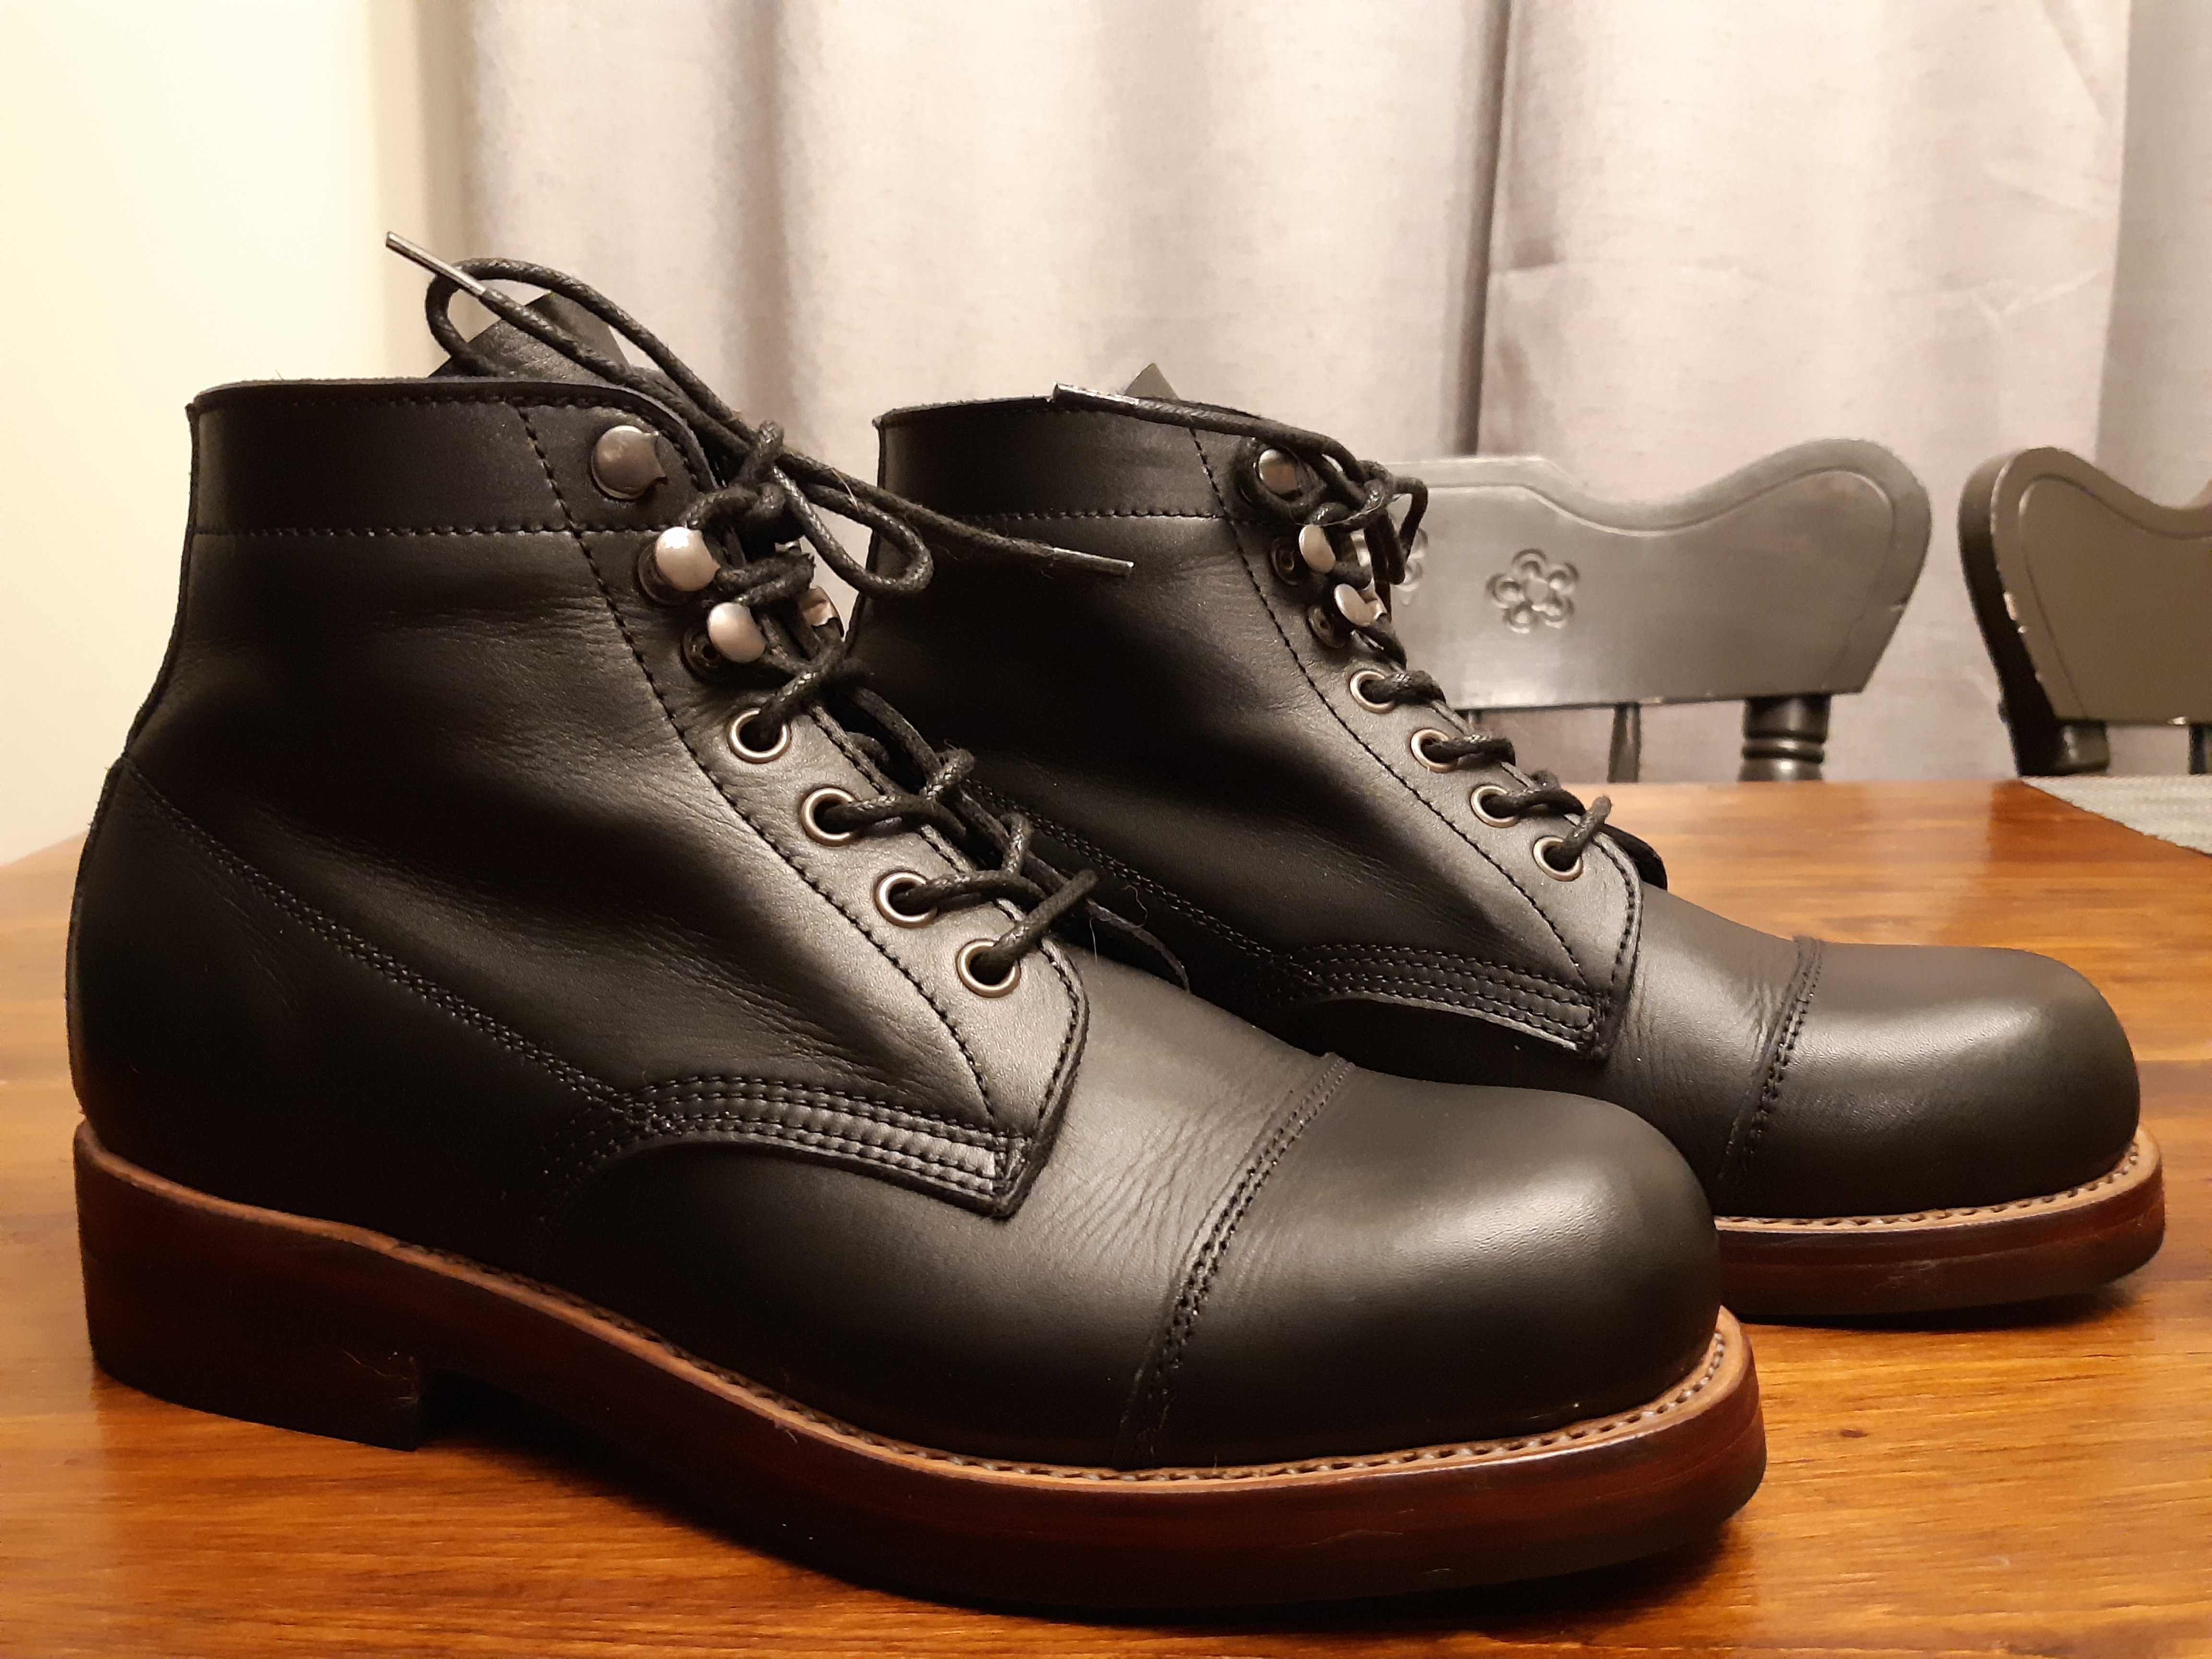 Goodyear welted boots, handmade | The Fedora Lounge